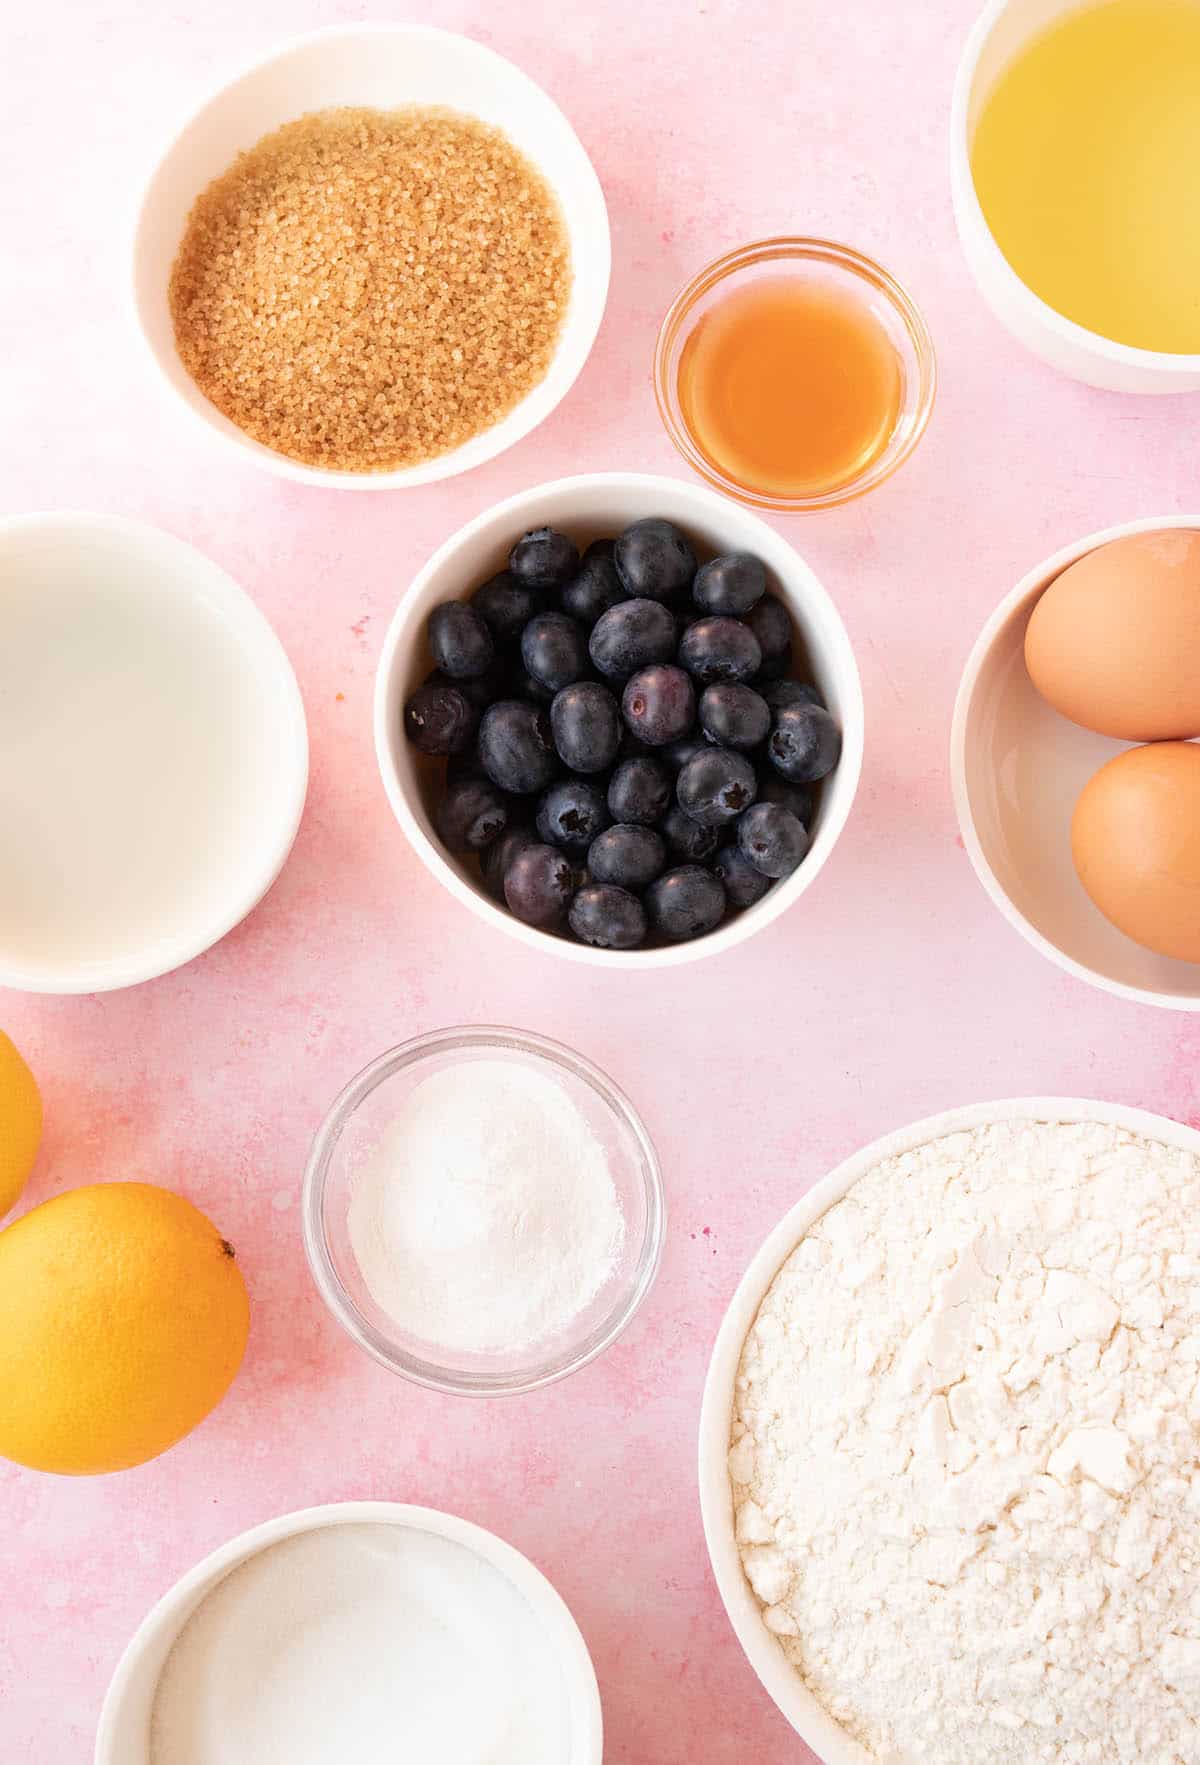 All the ingredients needed for muffins on a pink background.